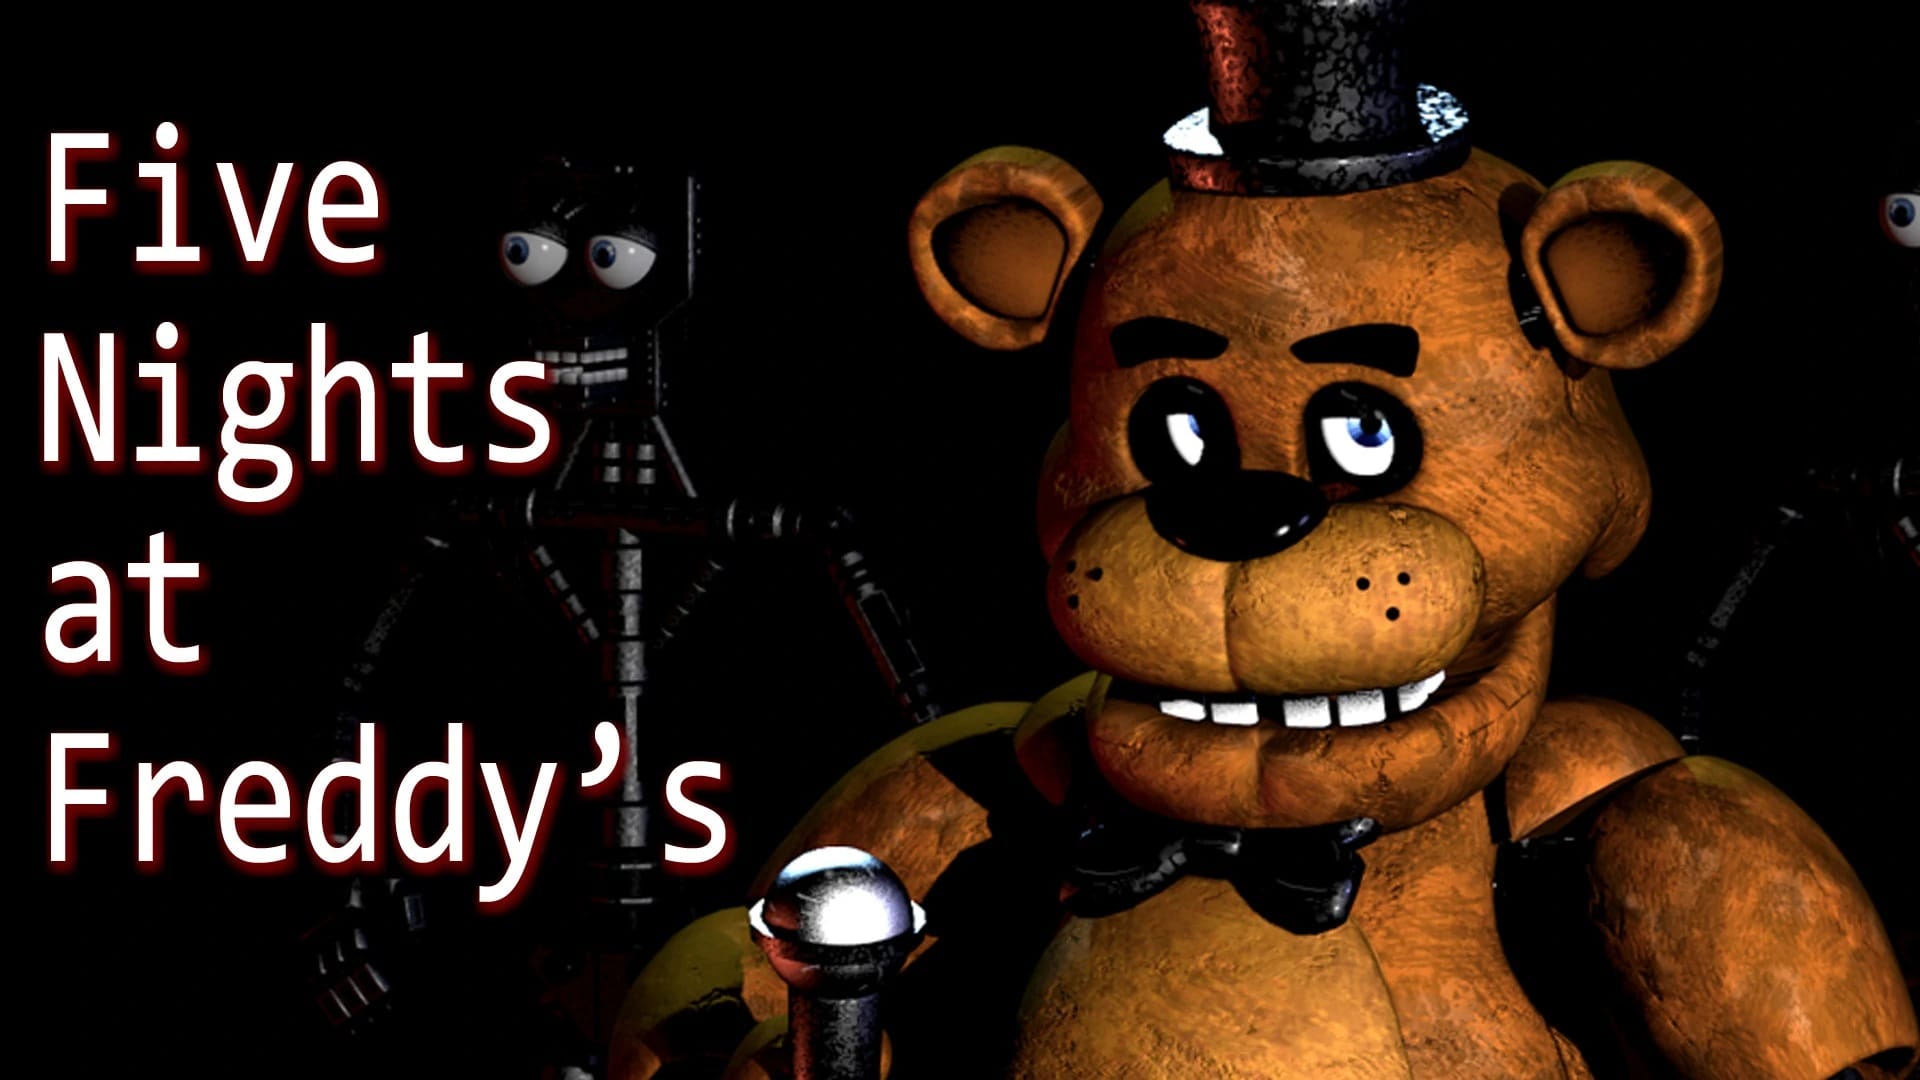 Five Nights at Freddy's: Sister Location Review - Not What You Expected